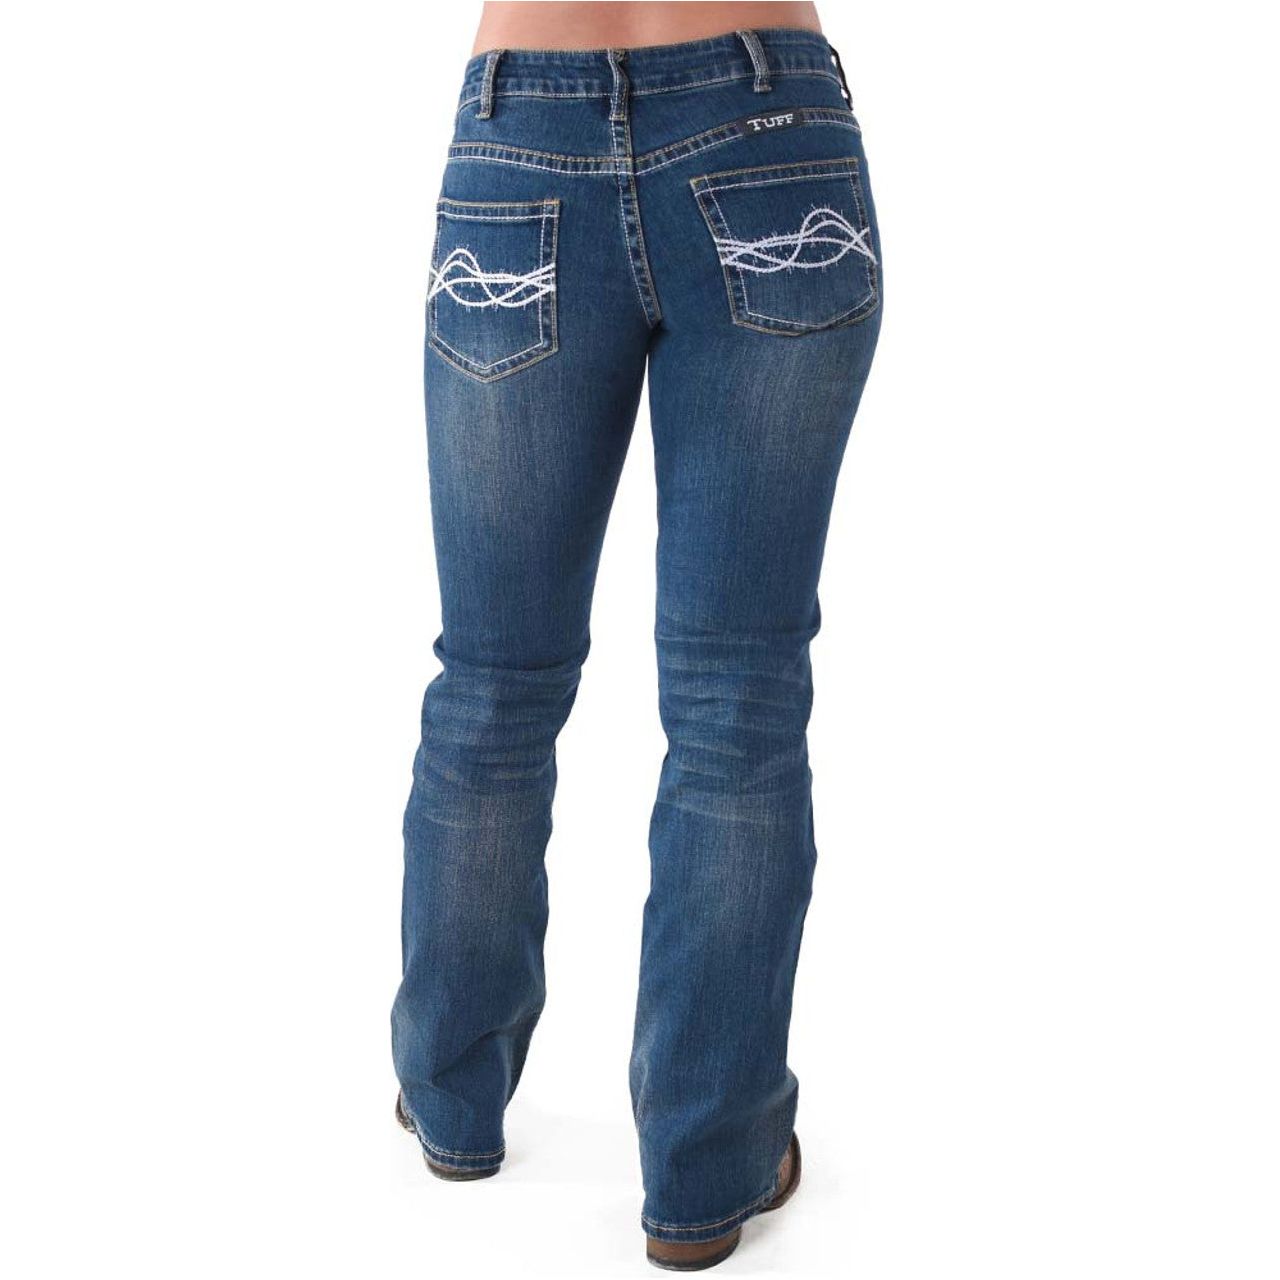 Cowgirl Tuff Jeans - Don't Fence Me In